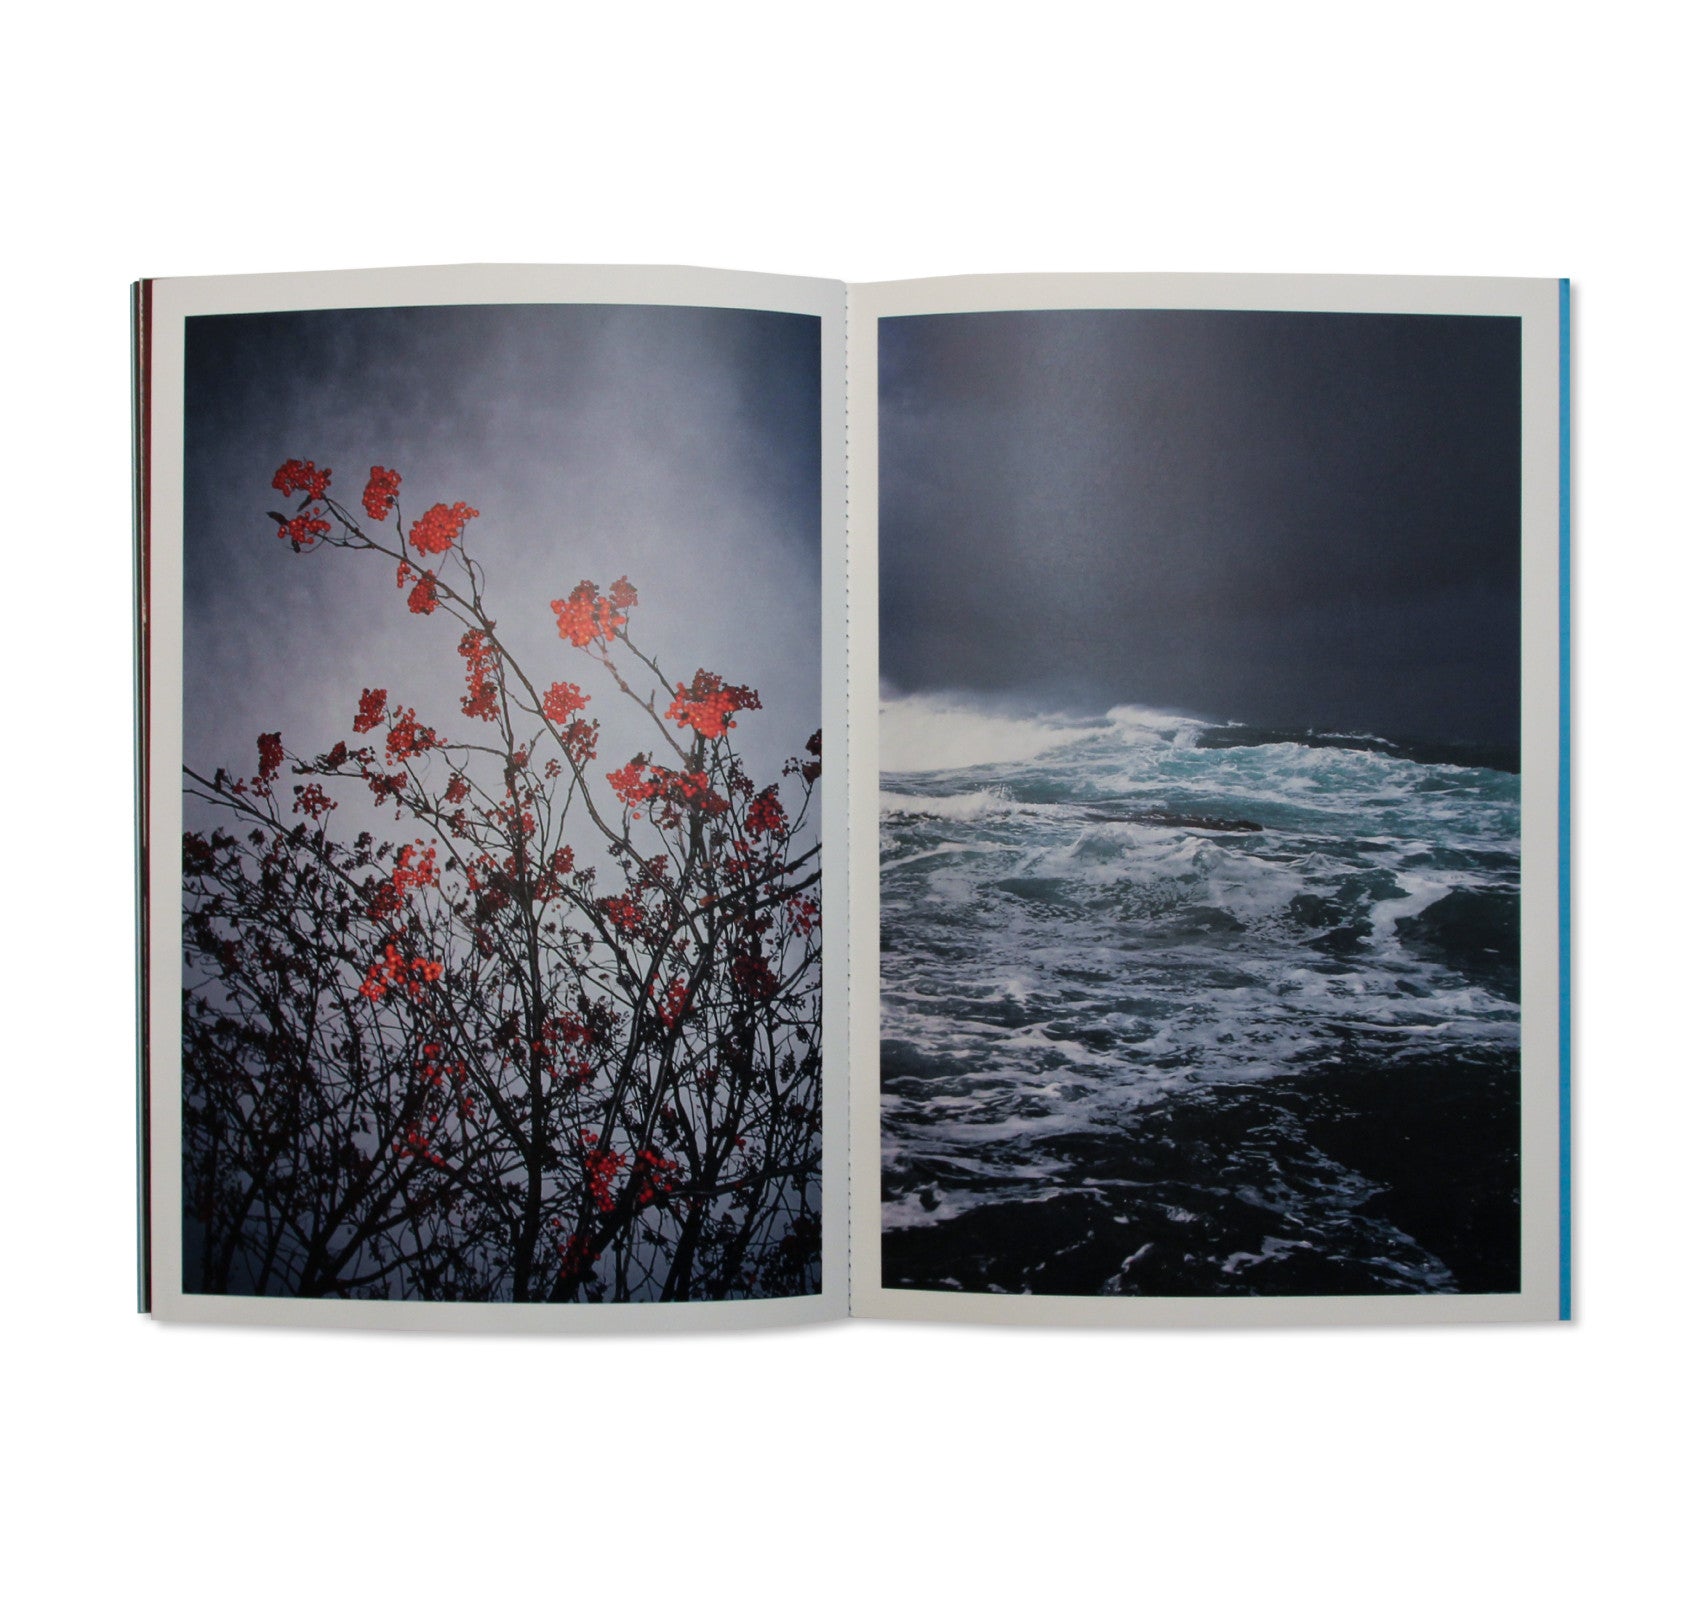 DROP OF LIGHT TO RUSHING WATER by Keiko Nomura [SIGNED]